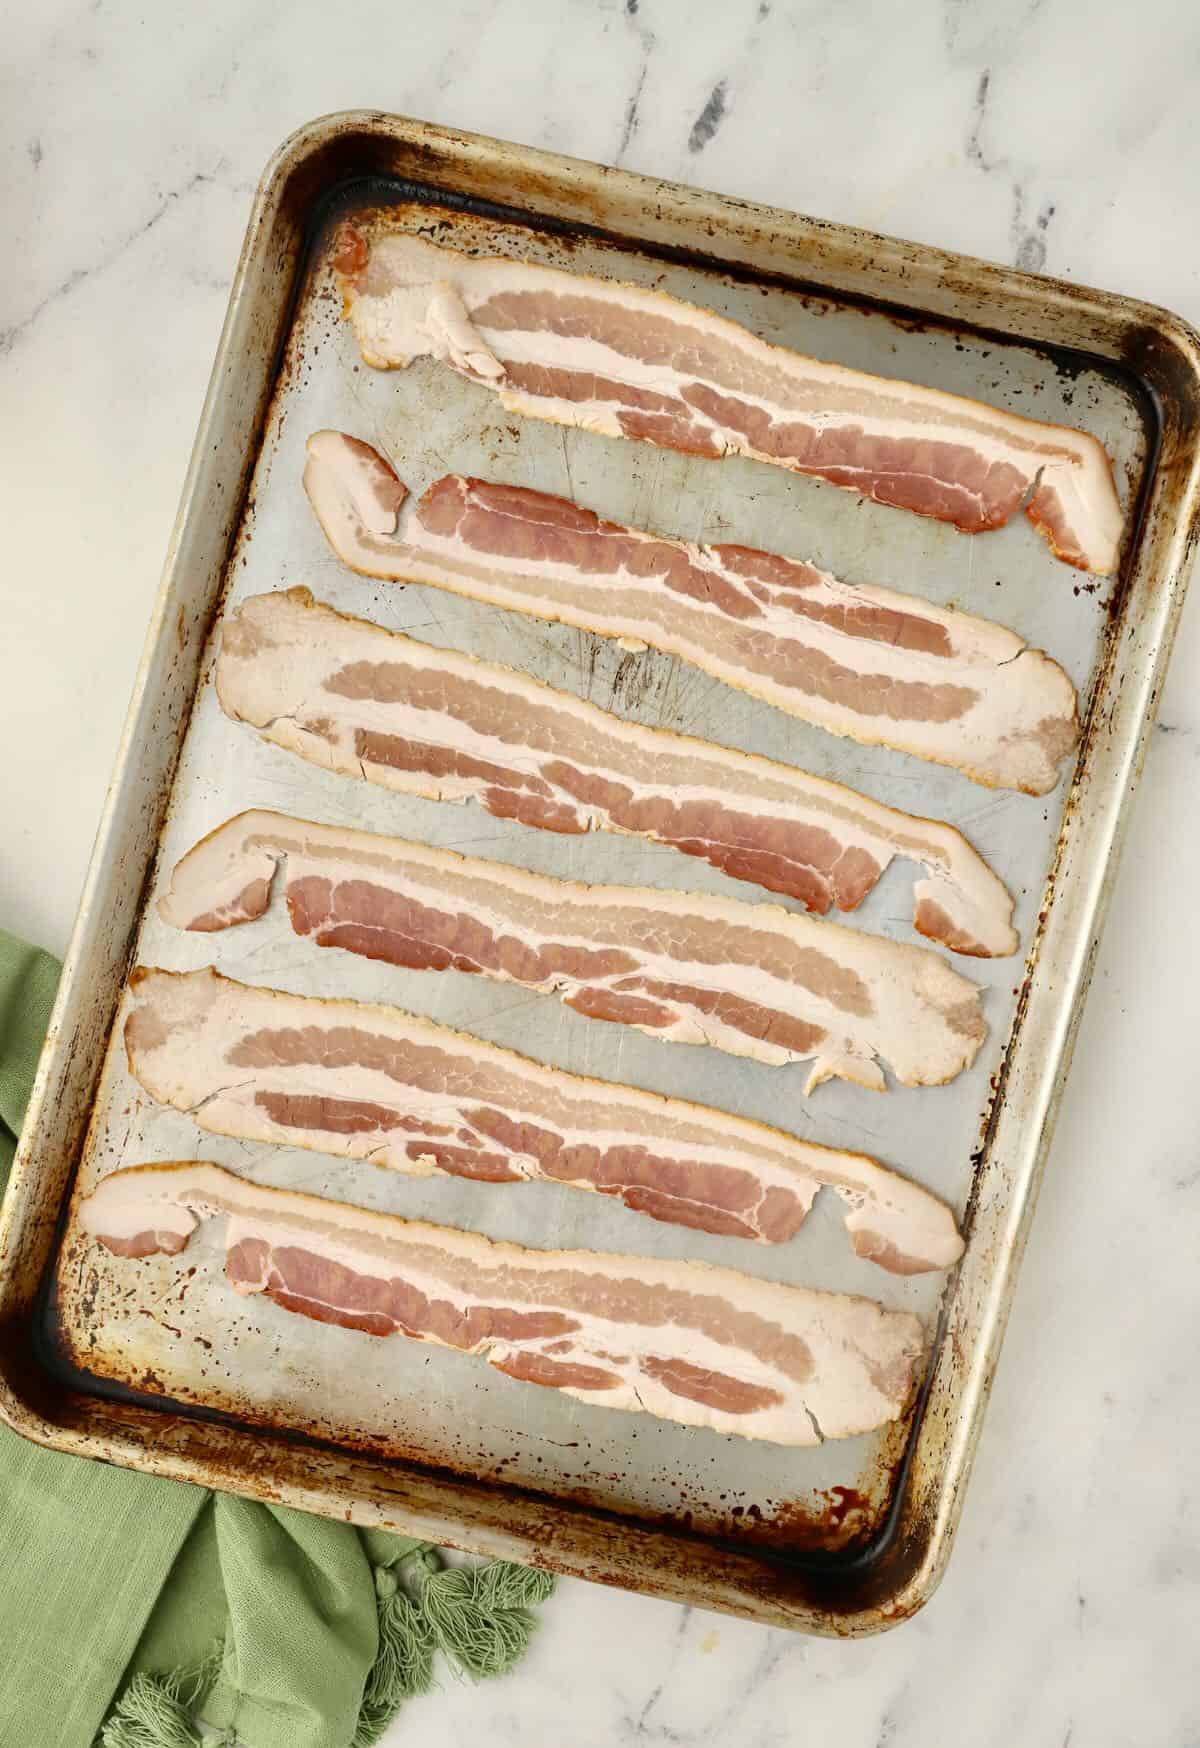 Slices of bacon on a baking sheet. 